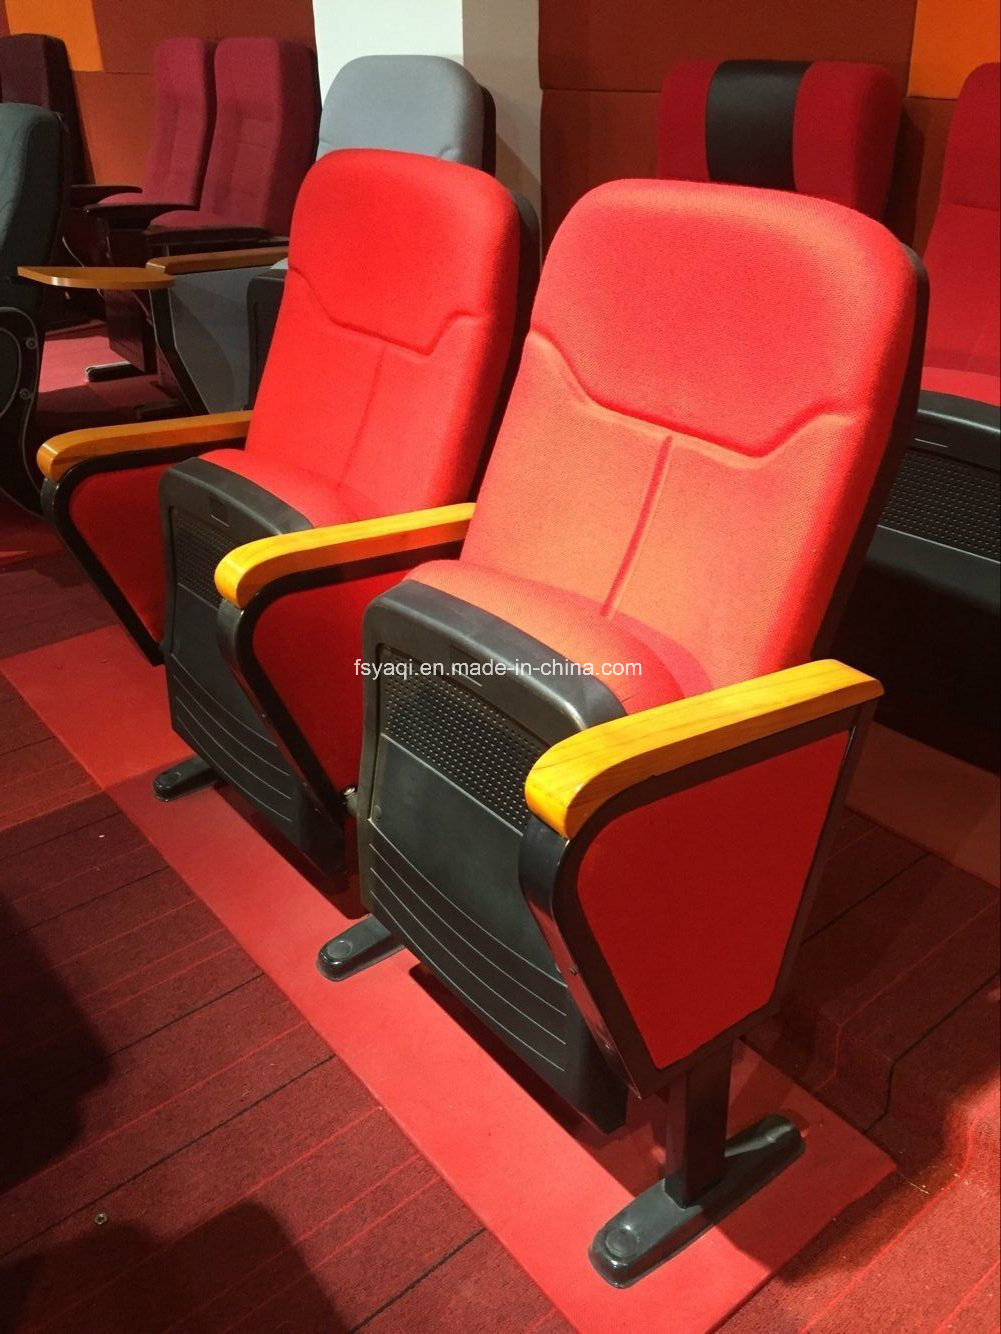 Hotsale Competitve Foldable Metal Theater Chair Auditorium Chair Cheap Price Upholstery Small Size Church Chair (YA-16)